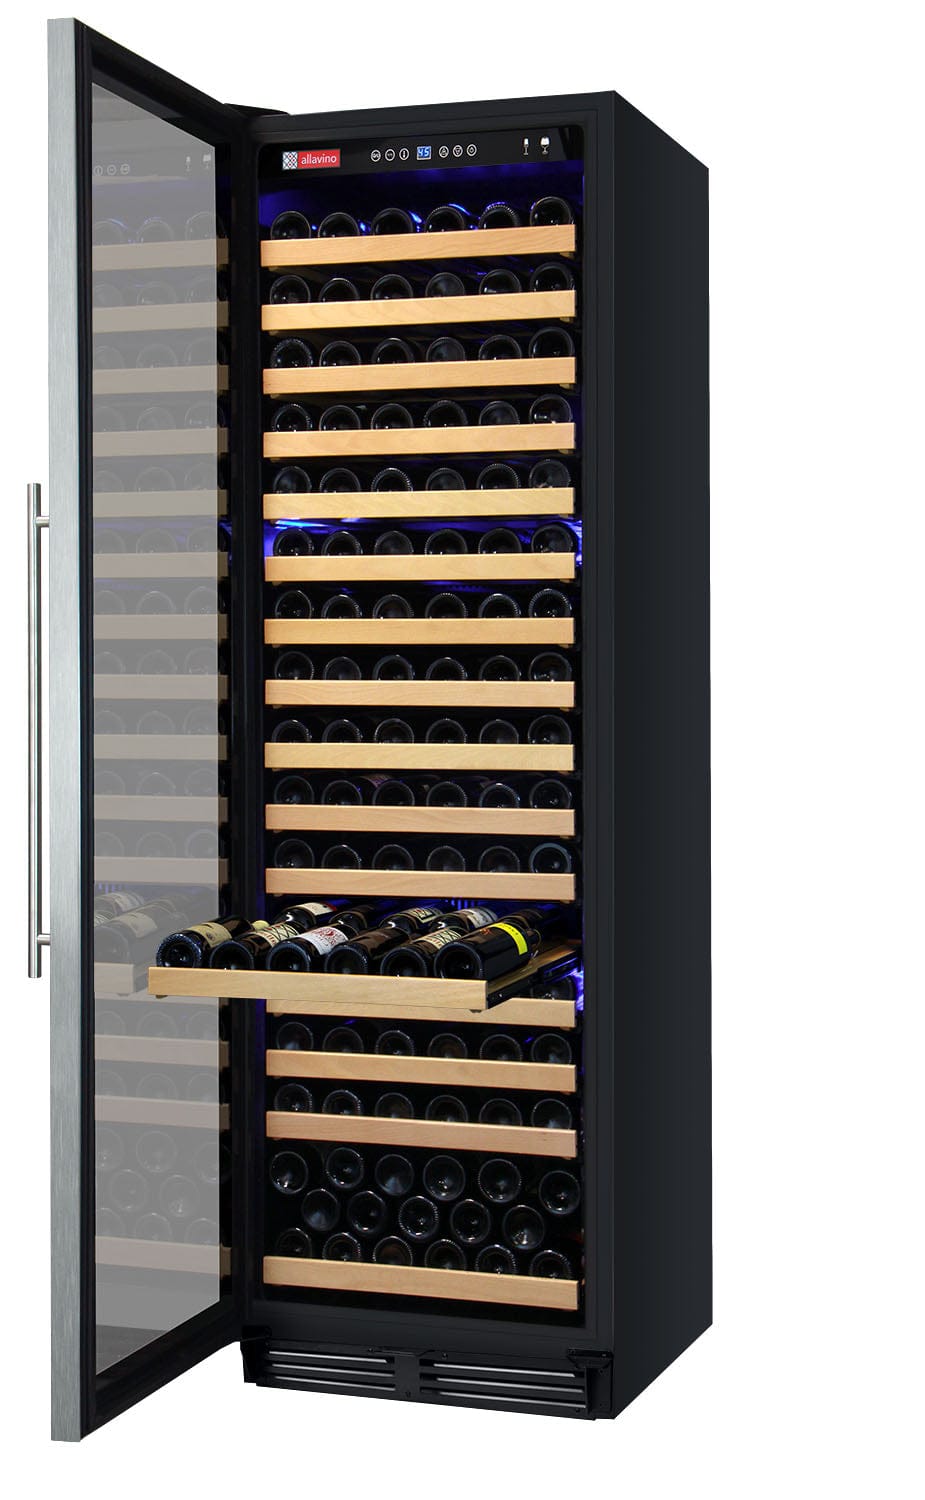 Allavino 174 Bottle Single Zone 24 Inch Wide Wine Cooler in stainless steel. Facing left with door open and one shelf out with full of wine bottles.